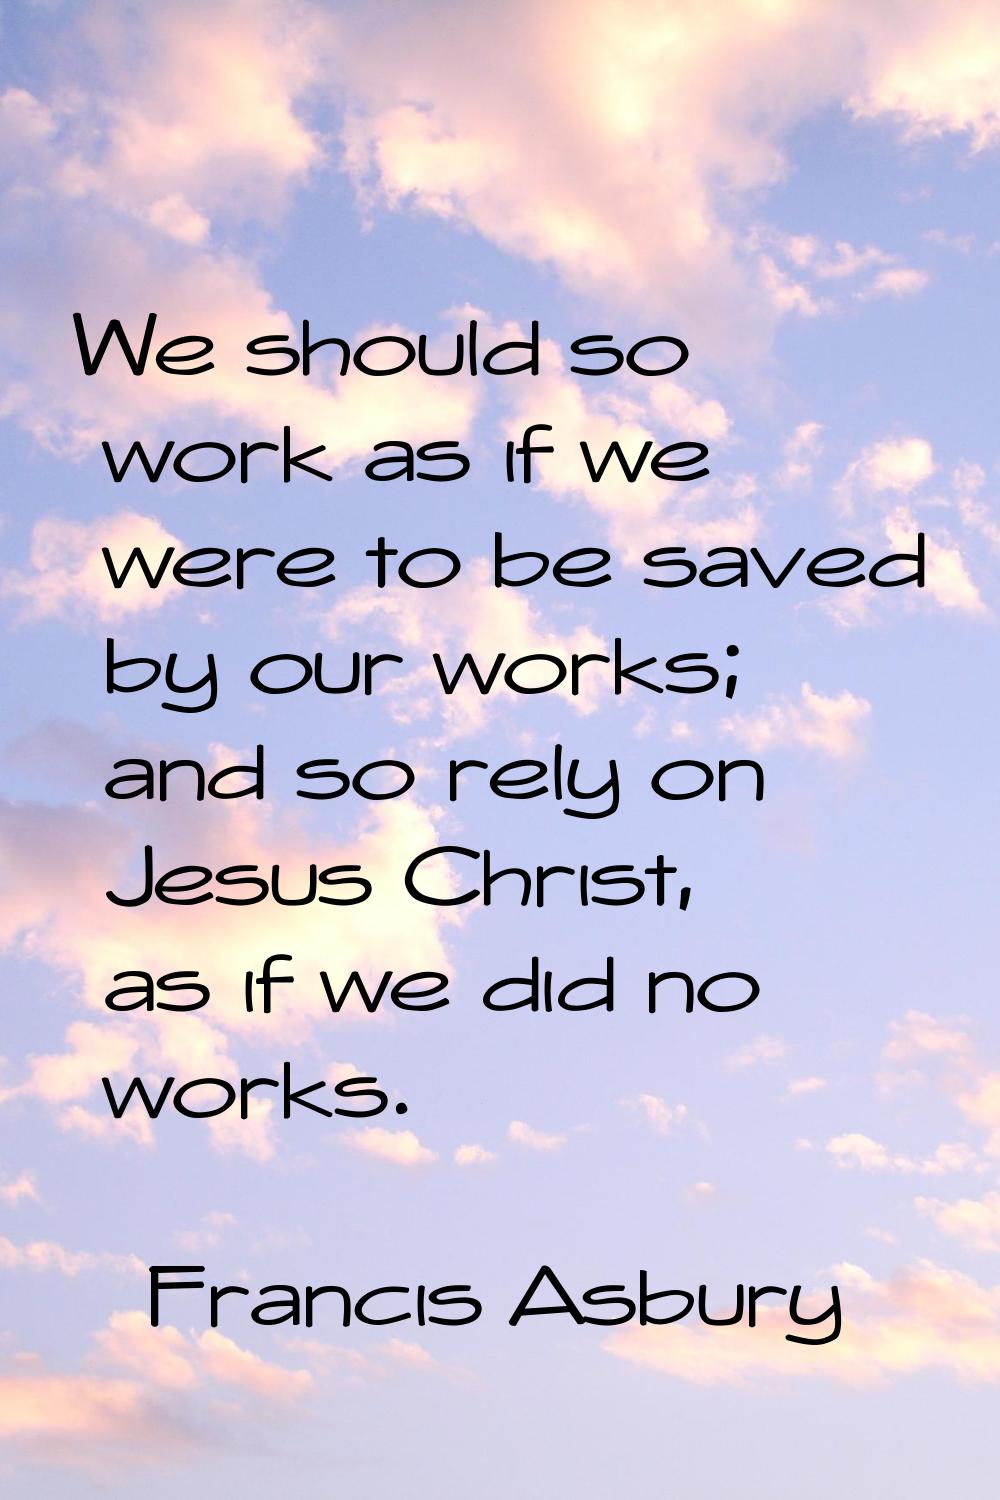 We should so work as if we were to be saved by our works; and so rely on Jesus Christ, as if we did